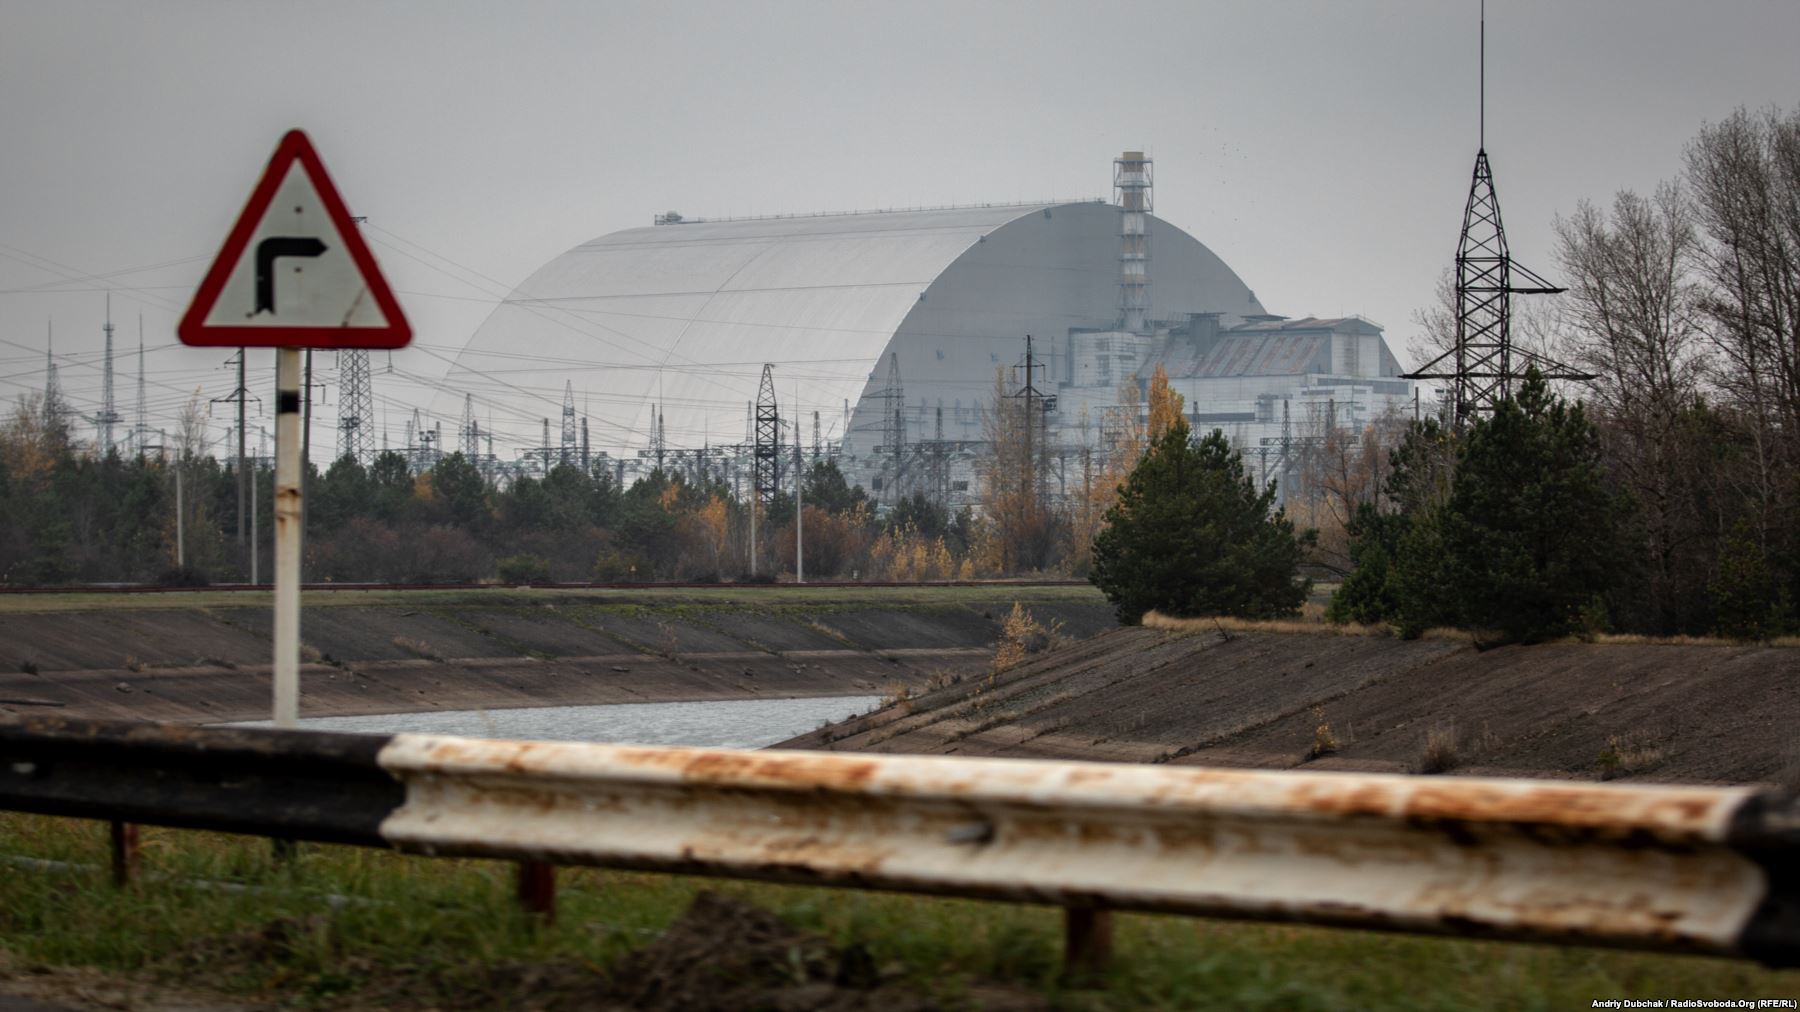 Chernobyl's New Safe Confinement (NSC) was designed to contain radiation for the next century. Photo by: Andriy Dubchak